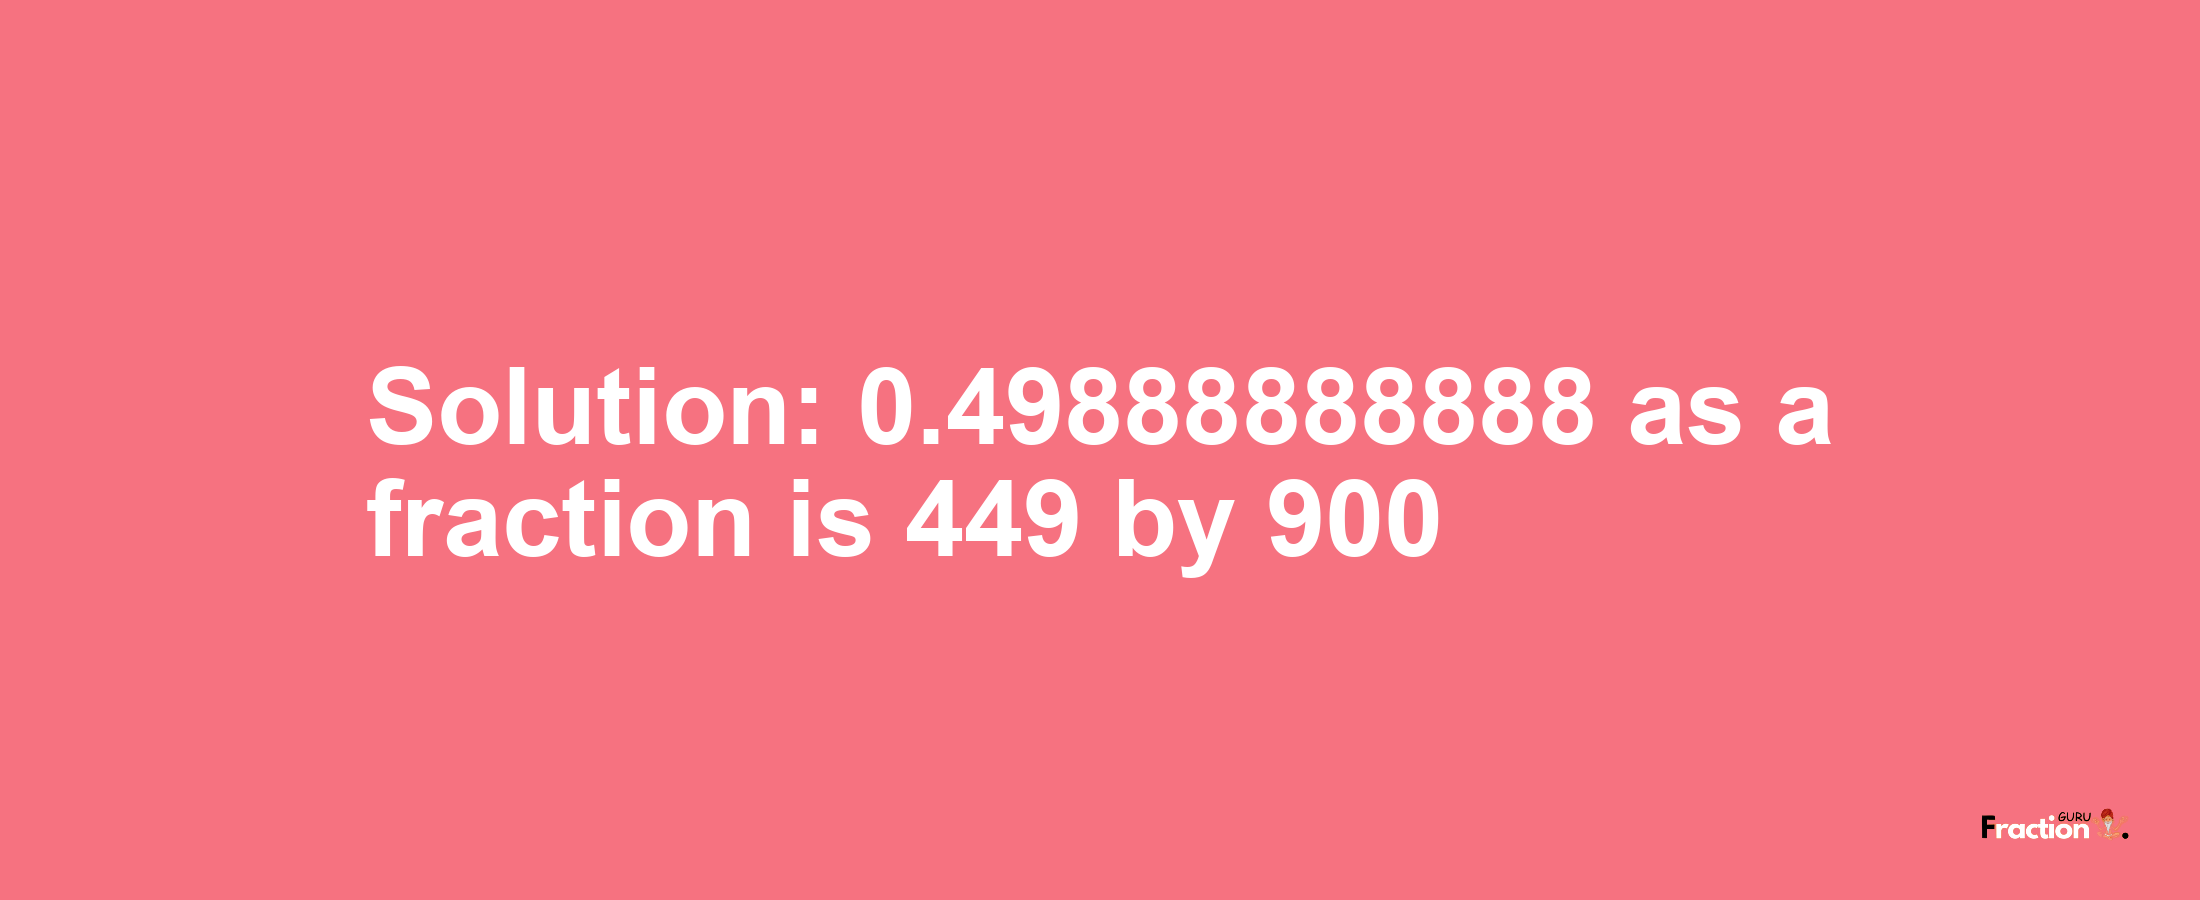 Solution:0.49888888888 as a fraction is 449/900